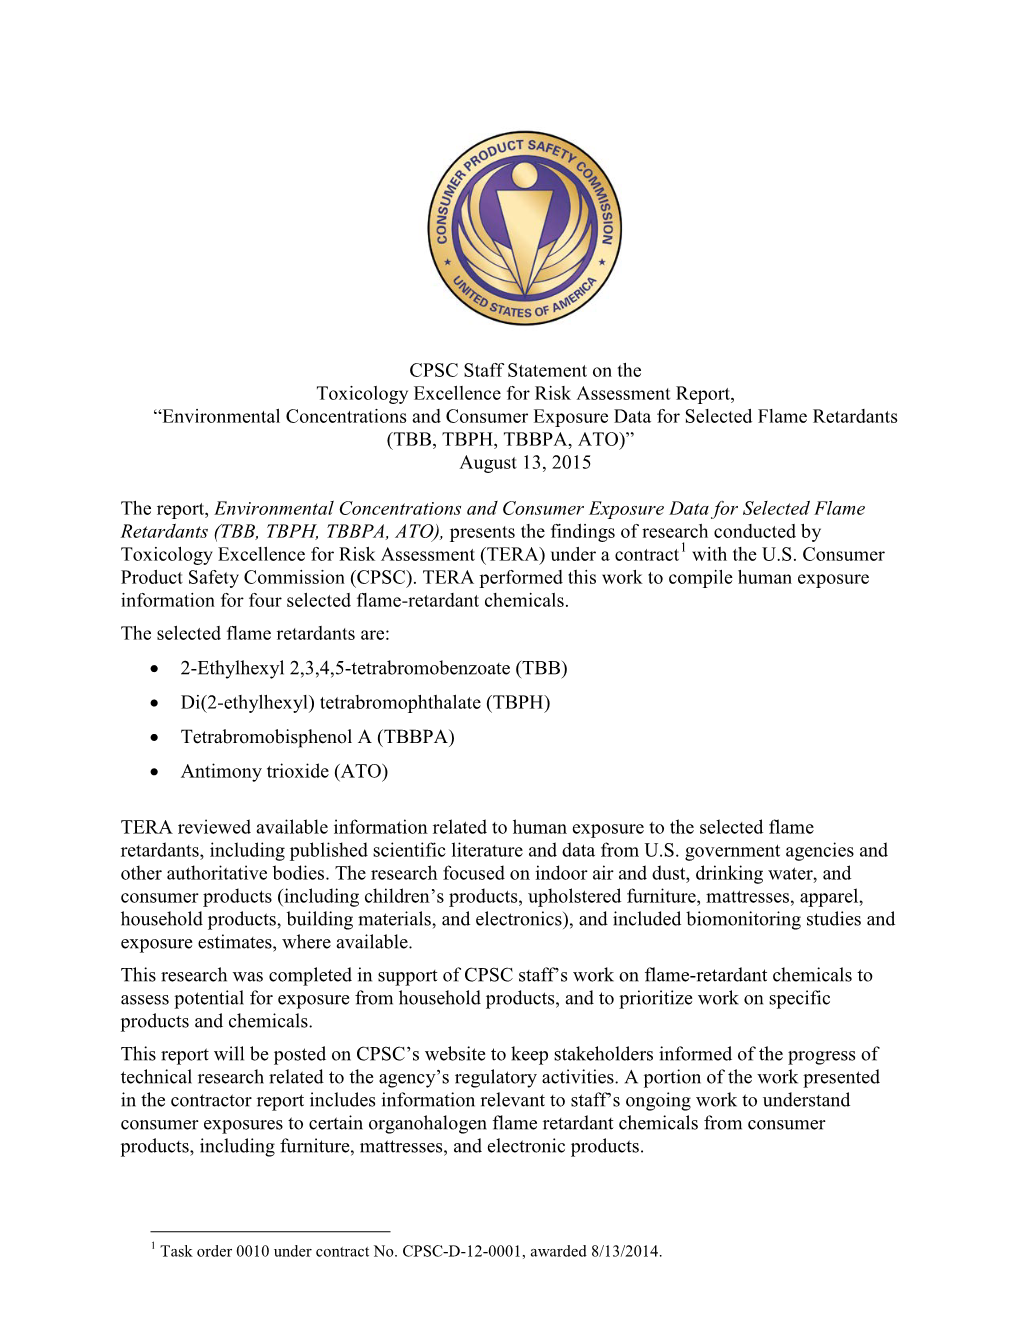 Environmental Concentrations and Consumer Exposure Data for Selected Flame Retardants (TBB, TBPH, TBBPA, ATO)” August 13, 2015